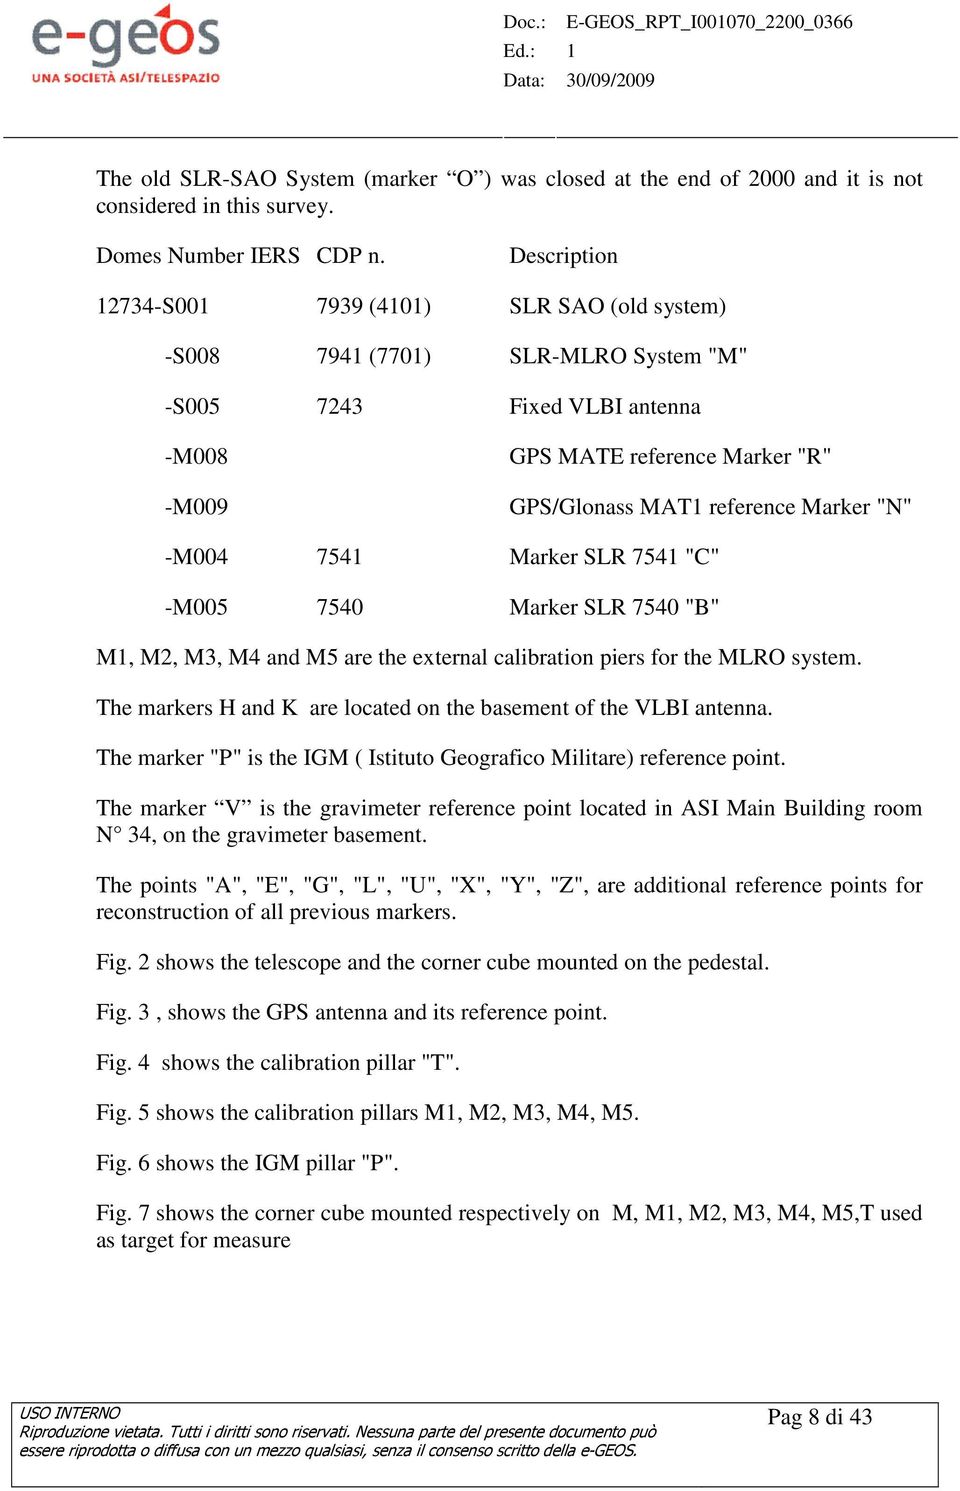 "N" -M004 7541 Marker SLR 7541 "C" -M005 7540 Marker SLR 7540 "B" M1, M2, M3, M4 and M5 are the external calibration piers for the MLRO system.